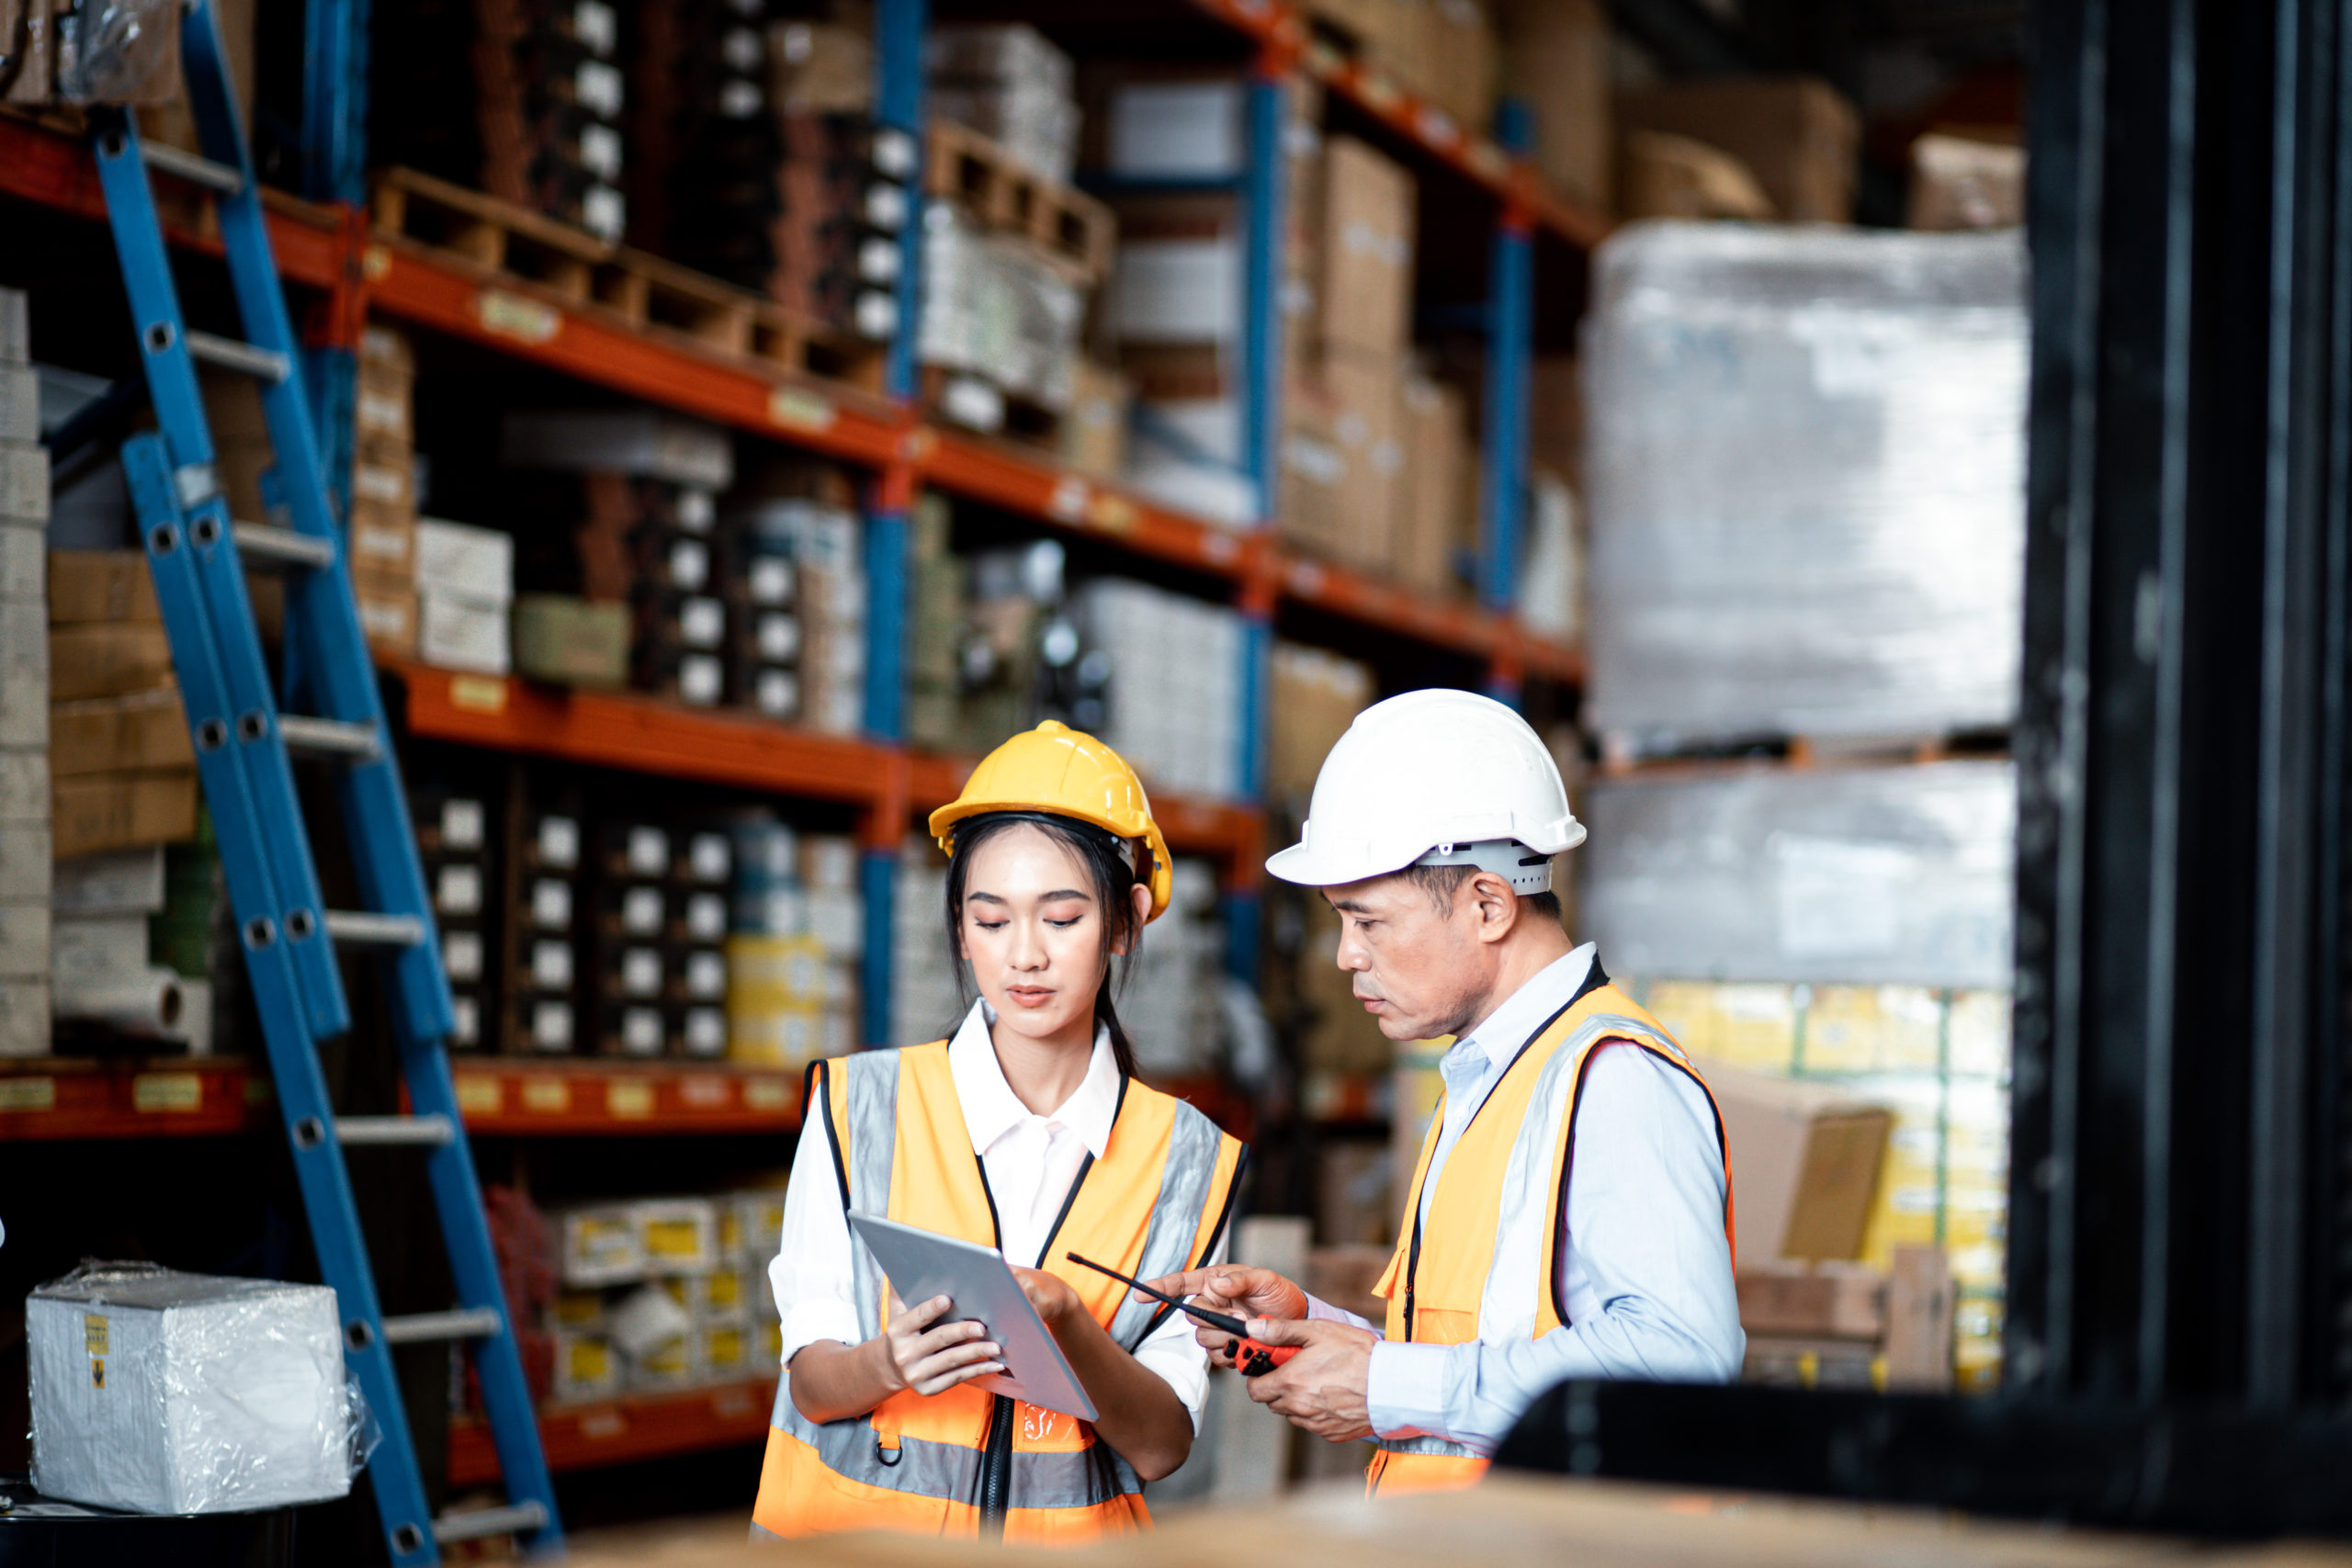 warehouse workers looking at their inventory & warehouse management software solution on a tablet